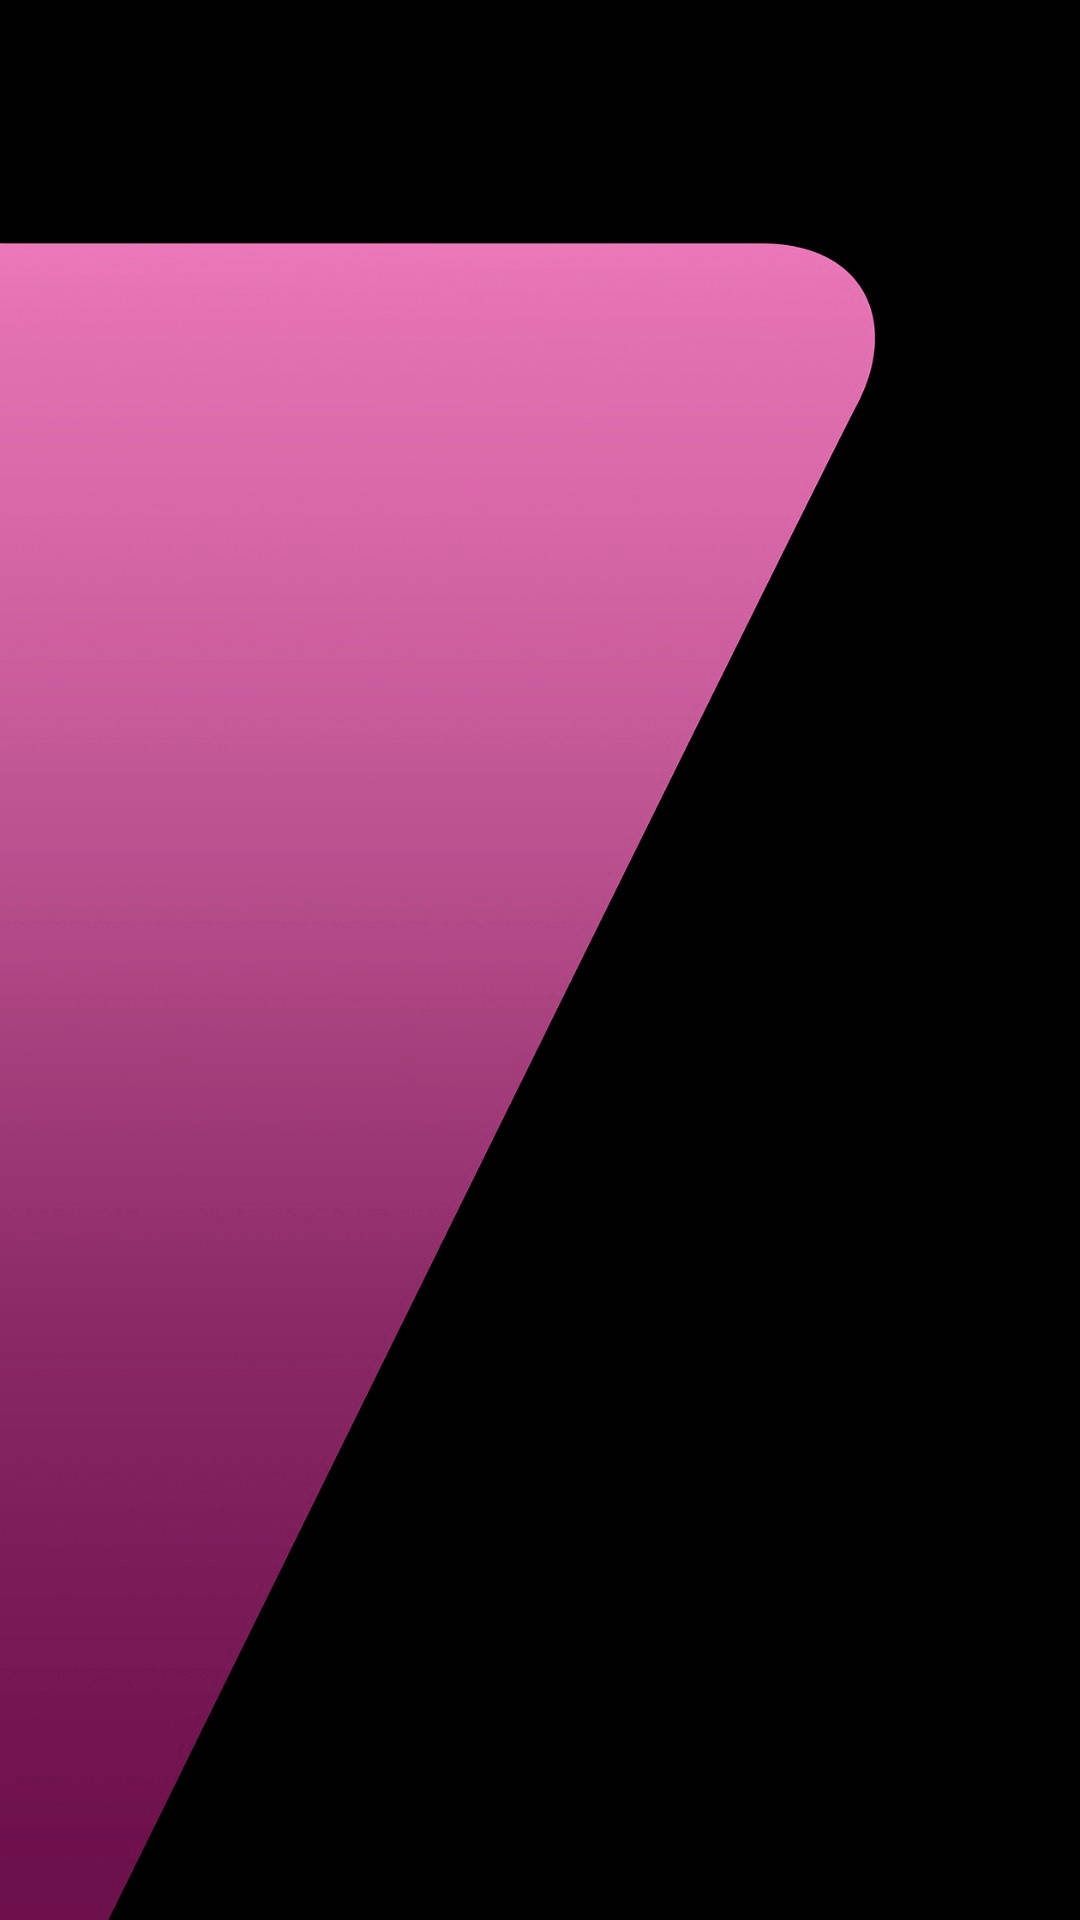 Samsung Galaxy S7 Edge Pink And Black Background